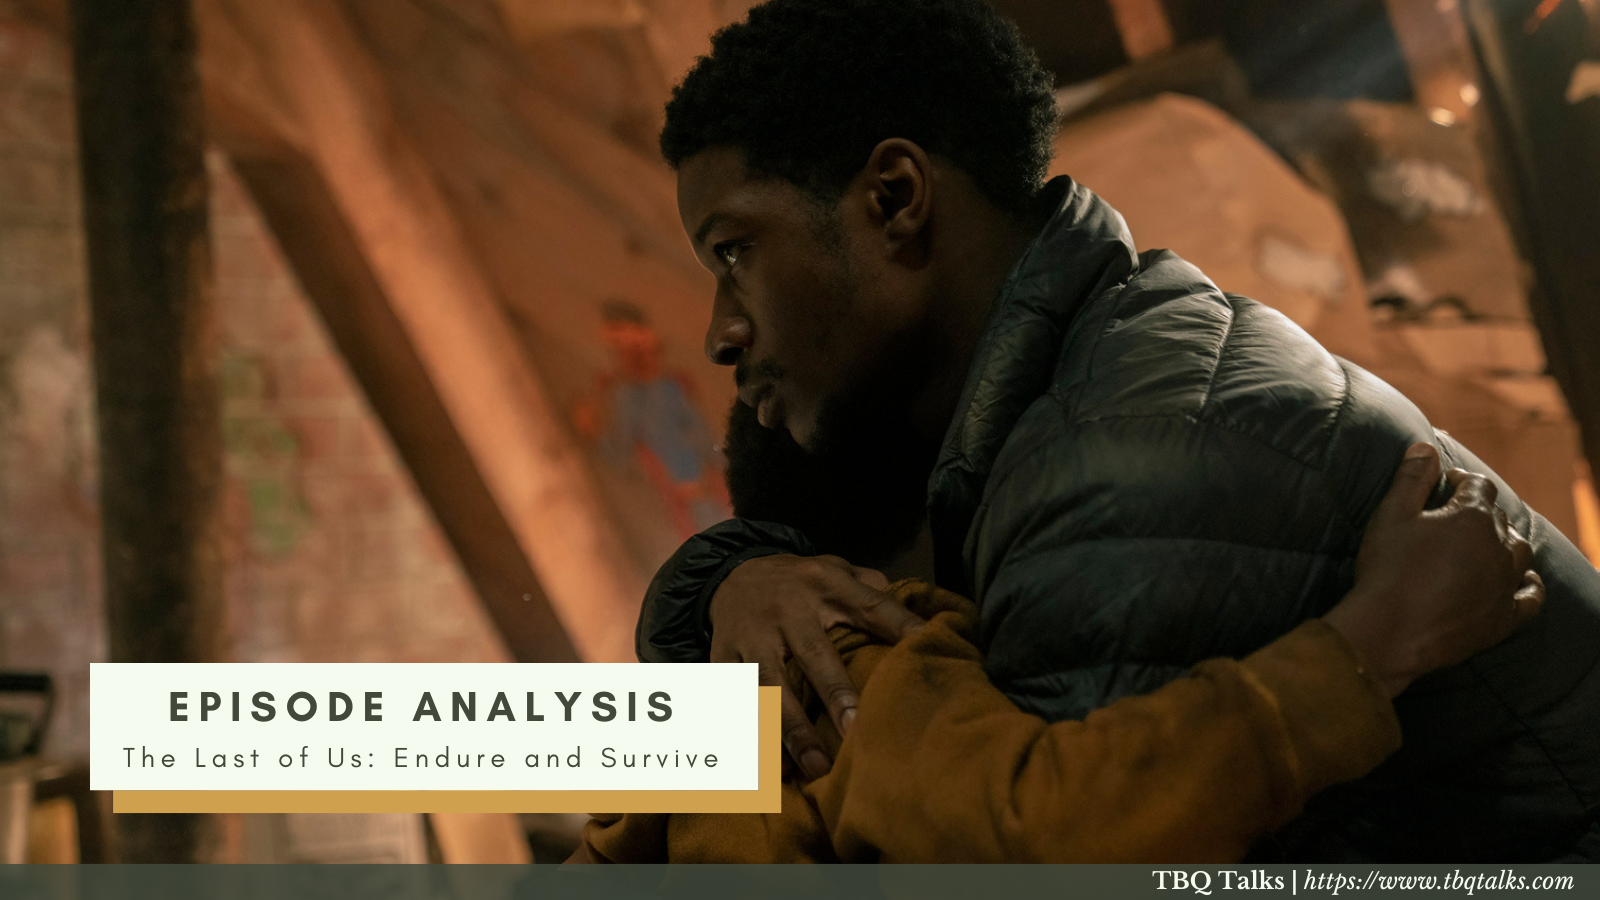 Episode Analysis The Last of Us: Endure and Survive